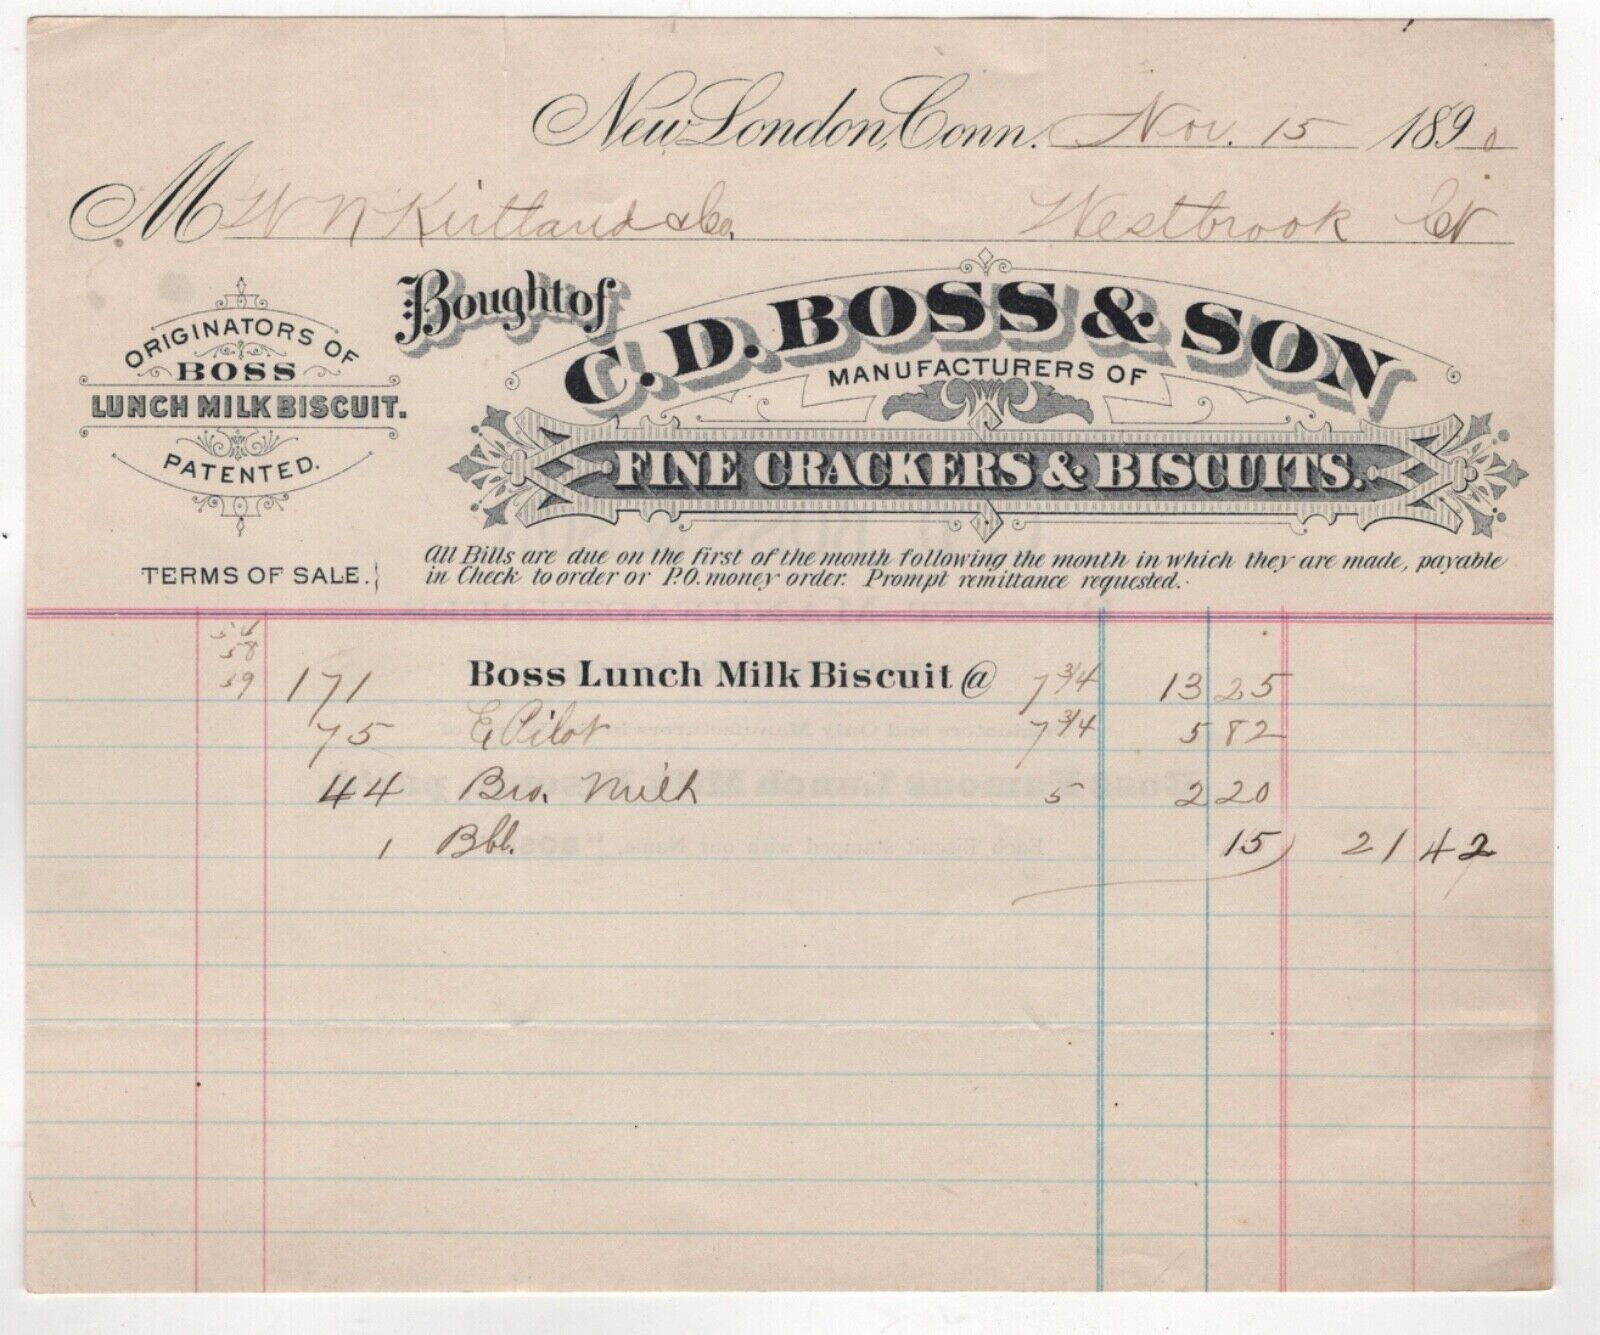 1890 C D BOSS & SON FINE CRACKERS & BISCUITS LUNCH MILK BISCUIT NEW LONDON CT